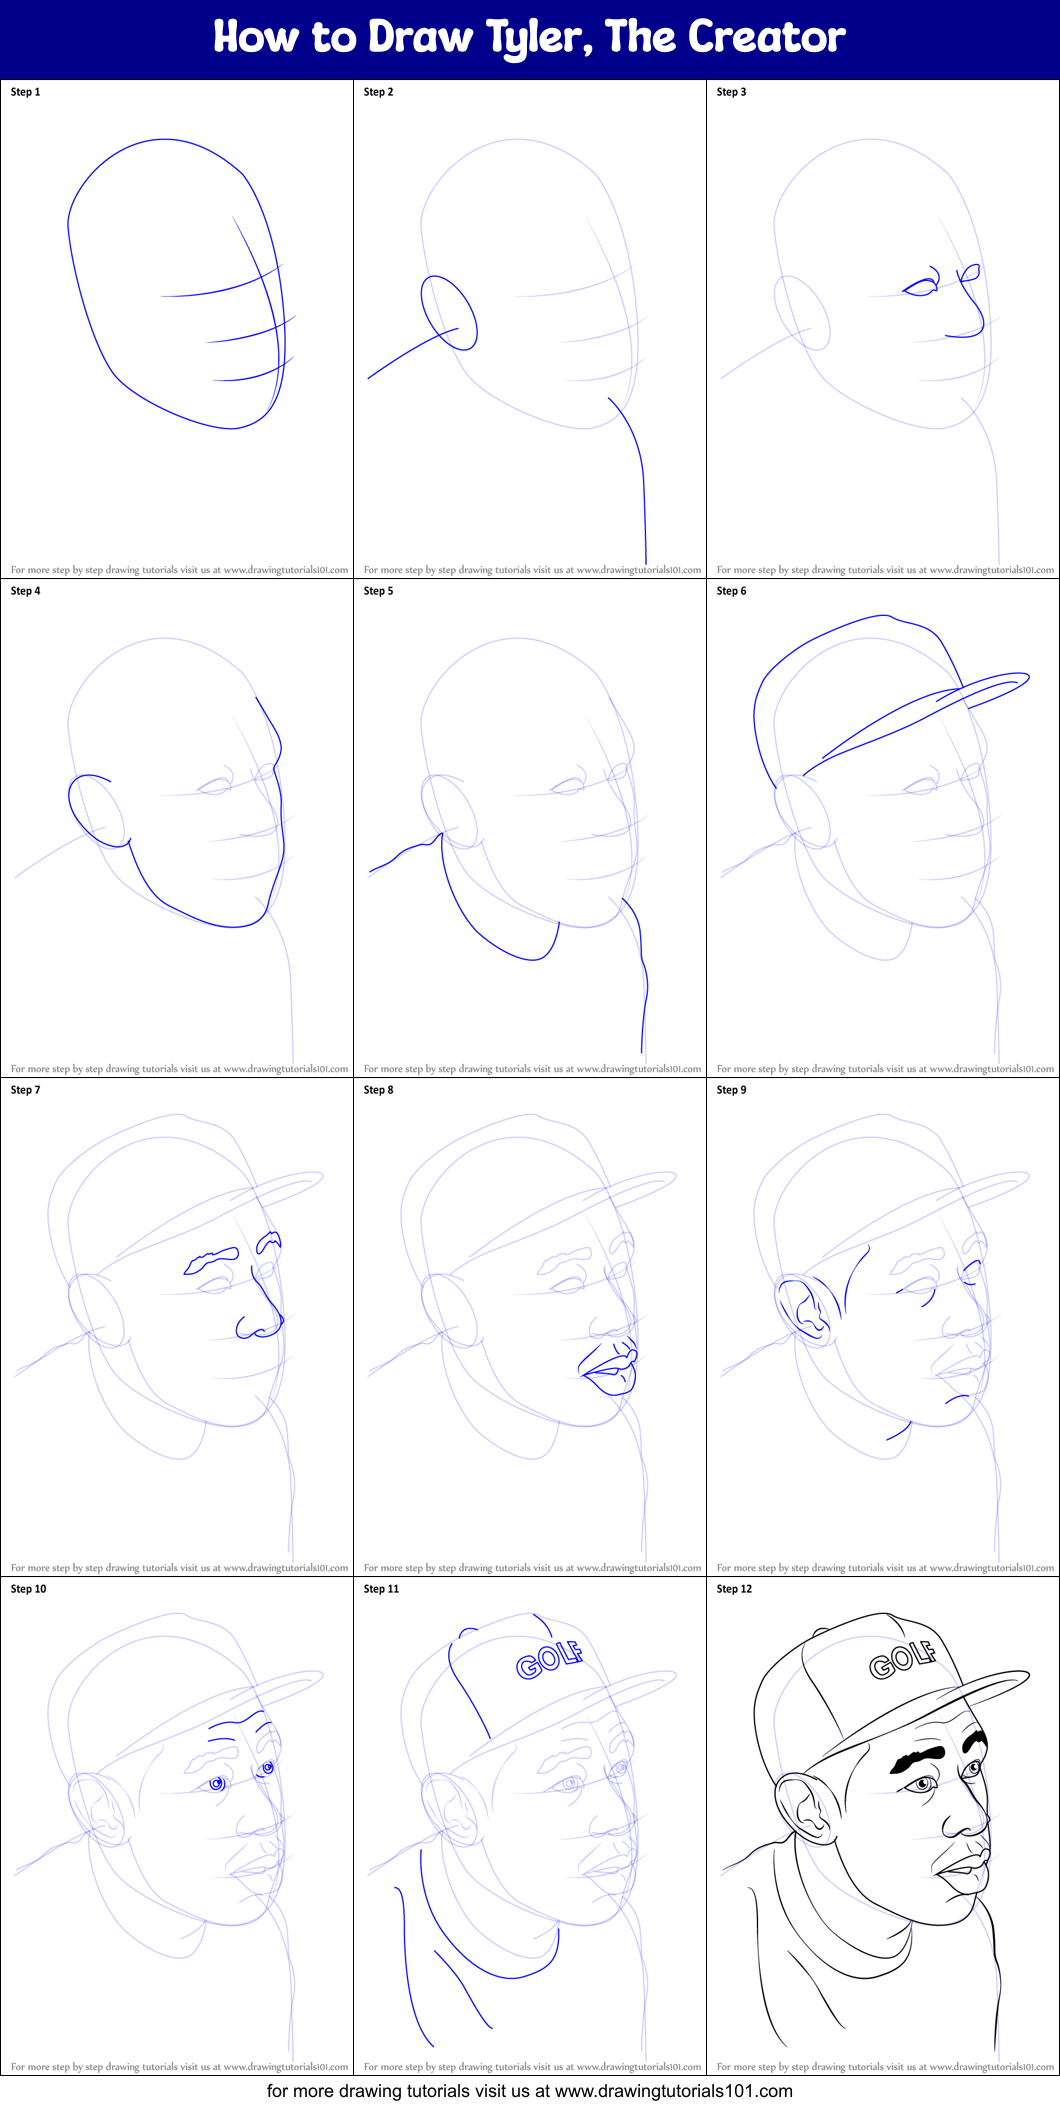 How to Draw Tyler, The Creator printable step by step drawing sheet